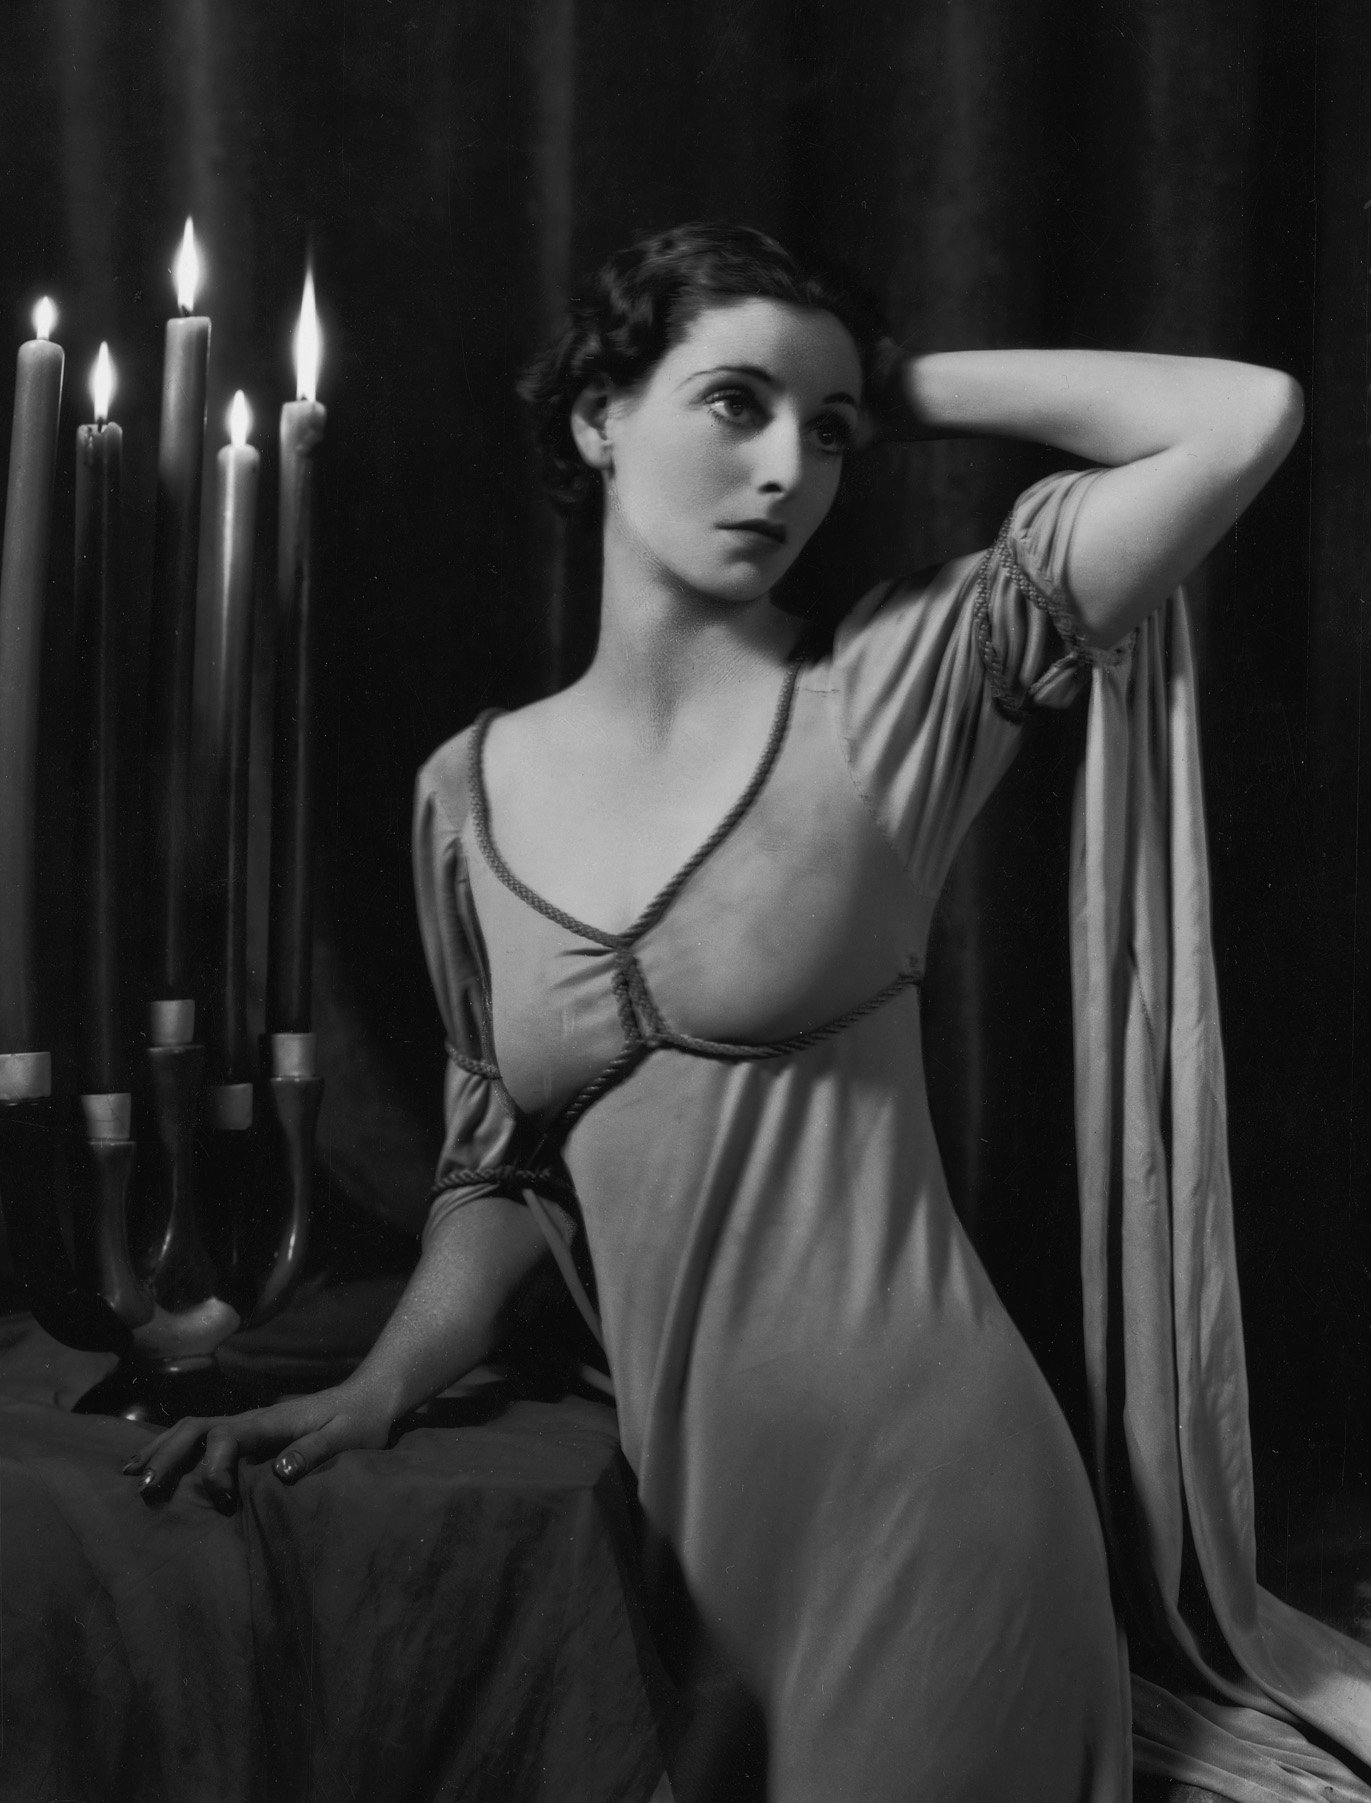 Lady And The Candles fine art photography